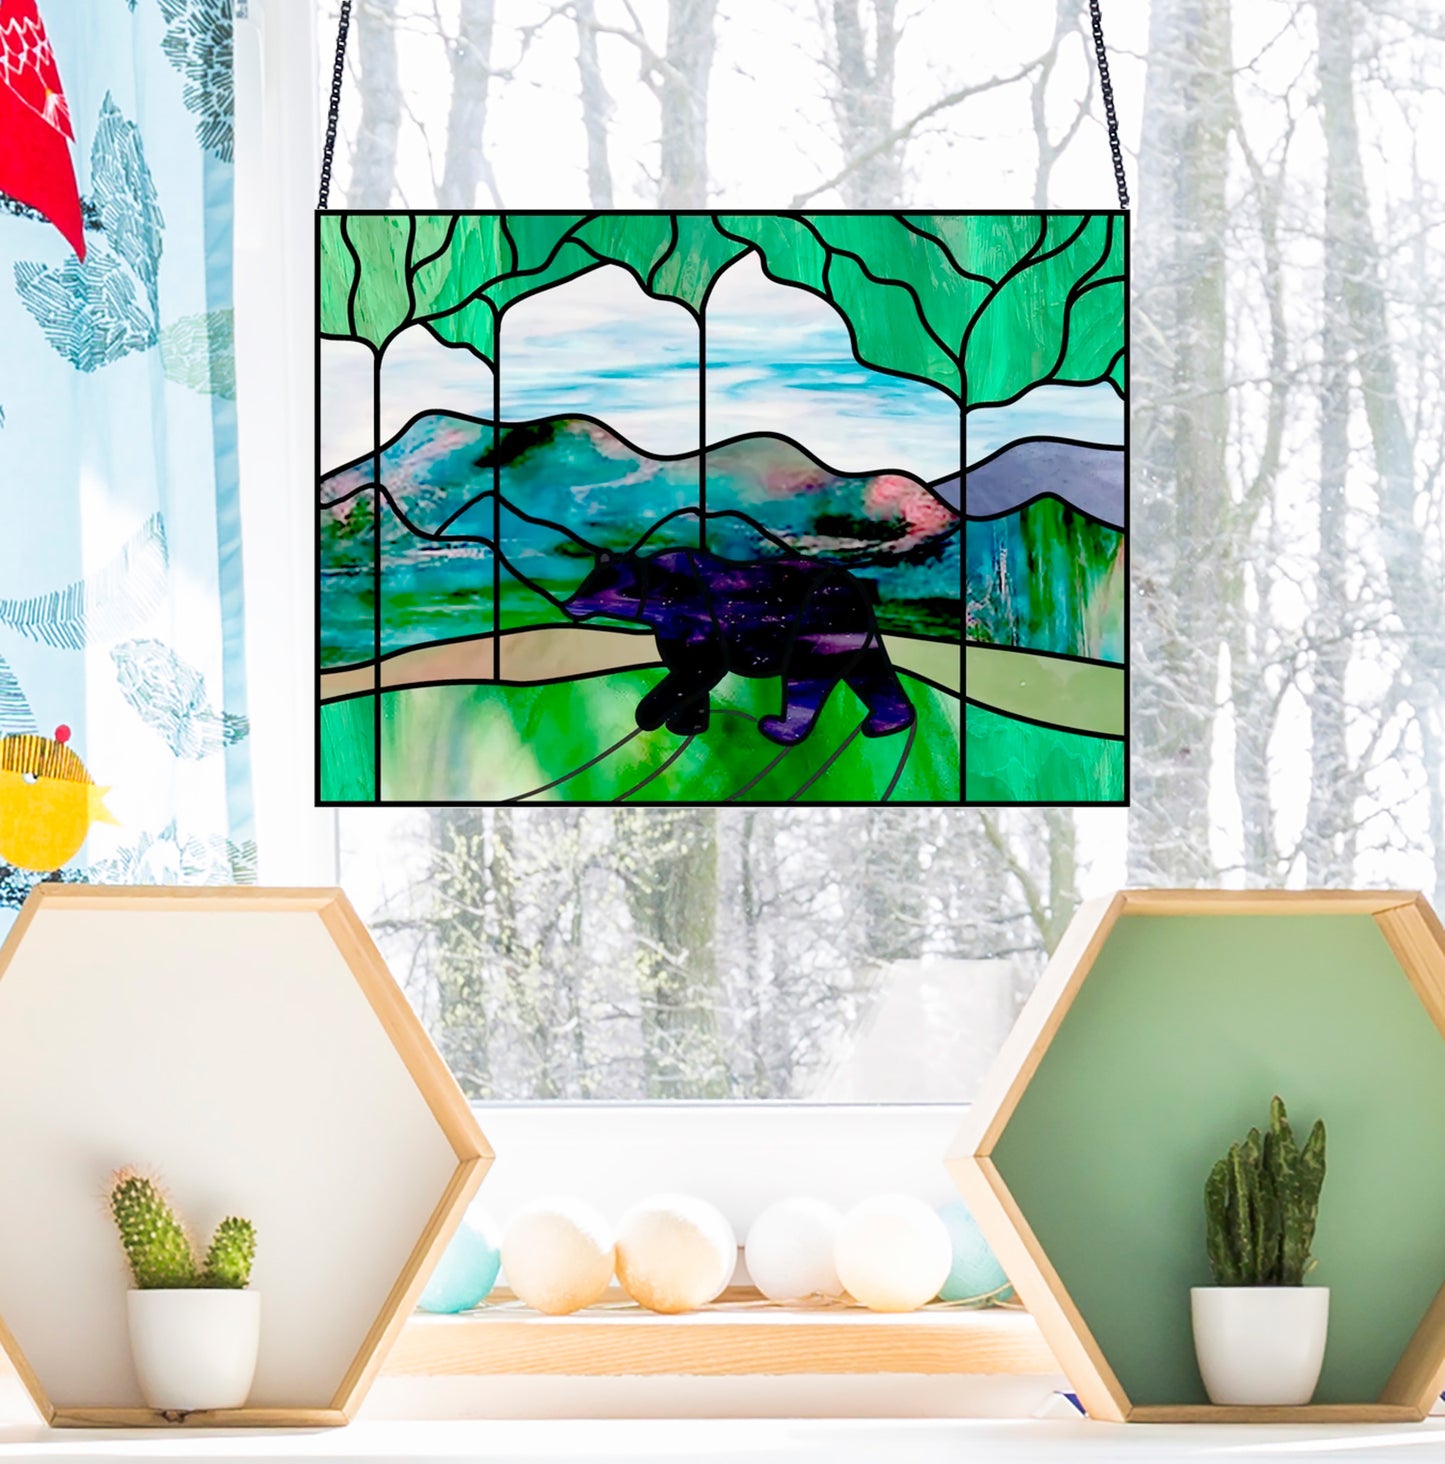 Bear in the forest stained glass pattern, instant pdf, shown in window with winter background